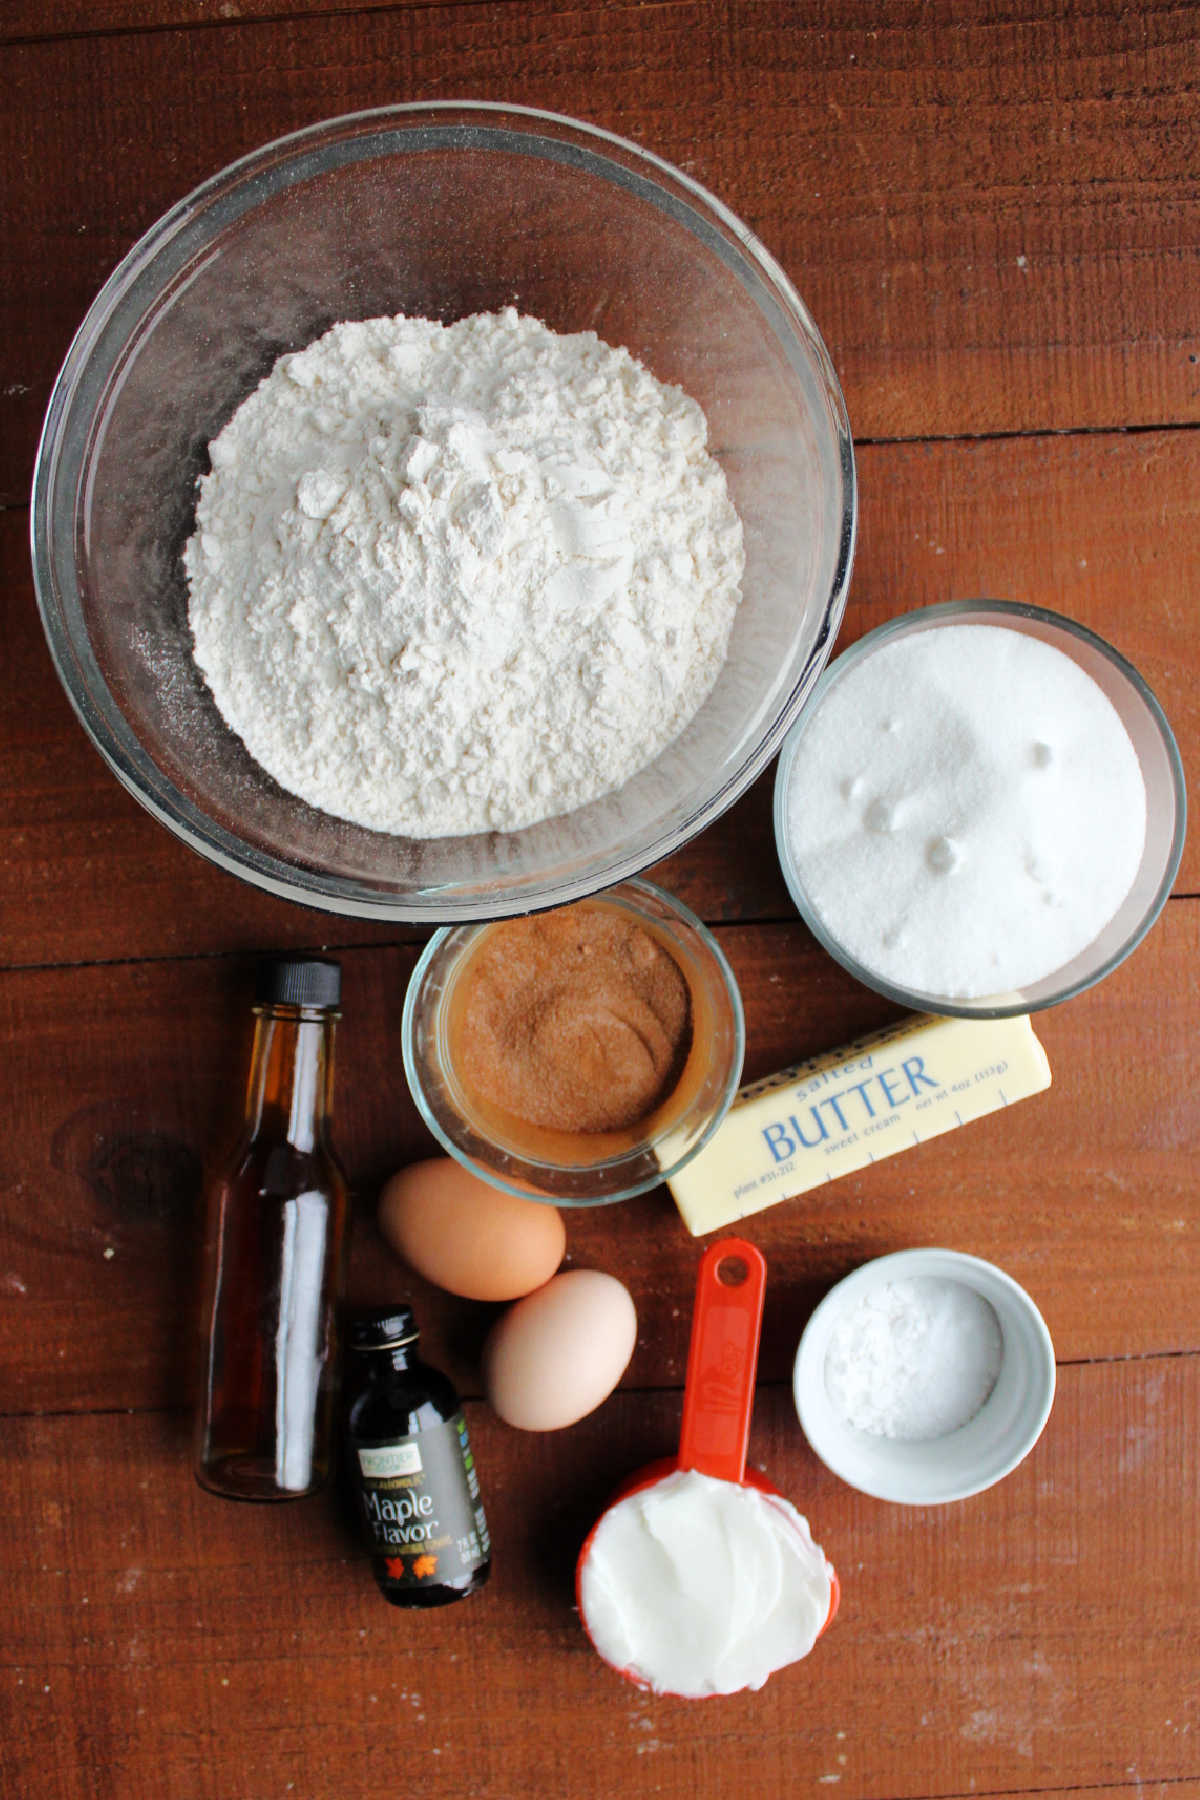 Ingredients including sugar, flour, butter, shortening, eggs, baking soda, cream of tartar, vanilla extract and maple extract ready to be made into maple snickerdoodle dough.